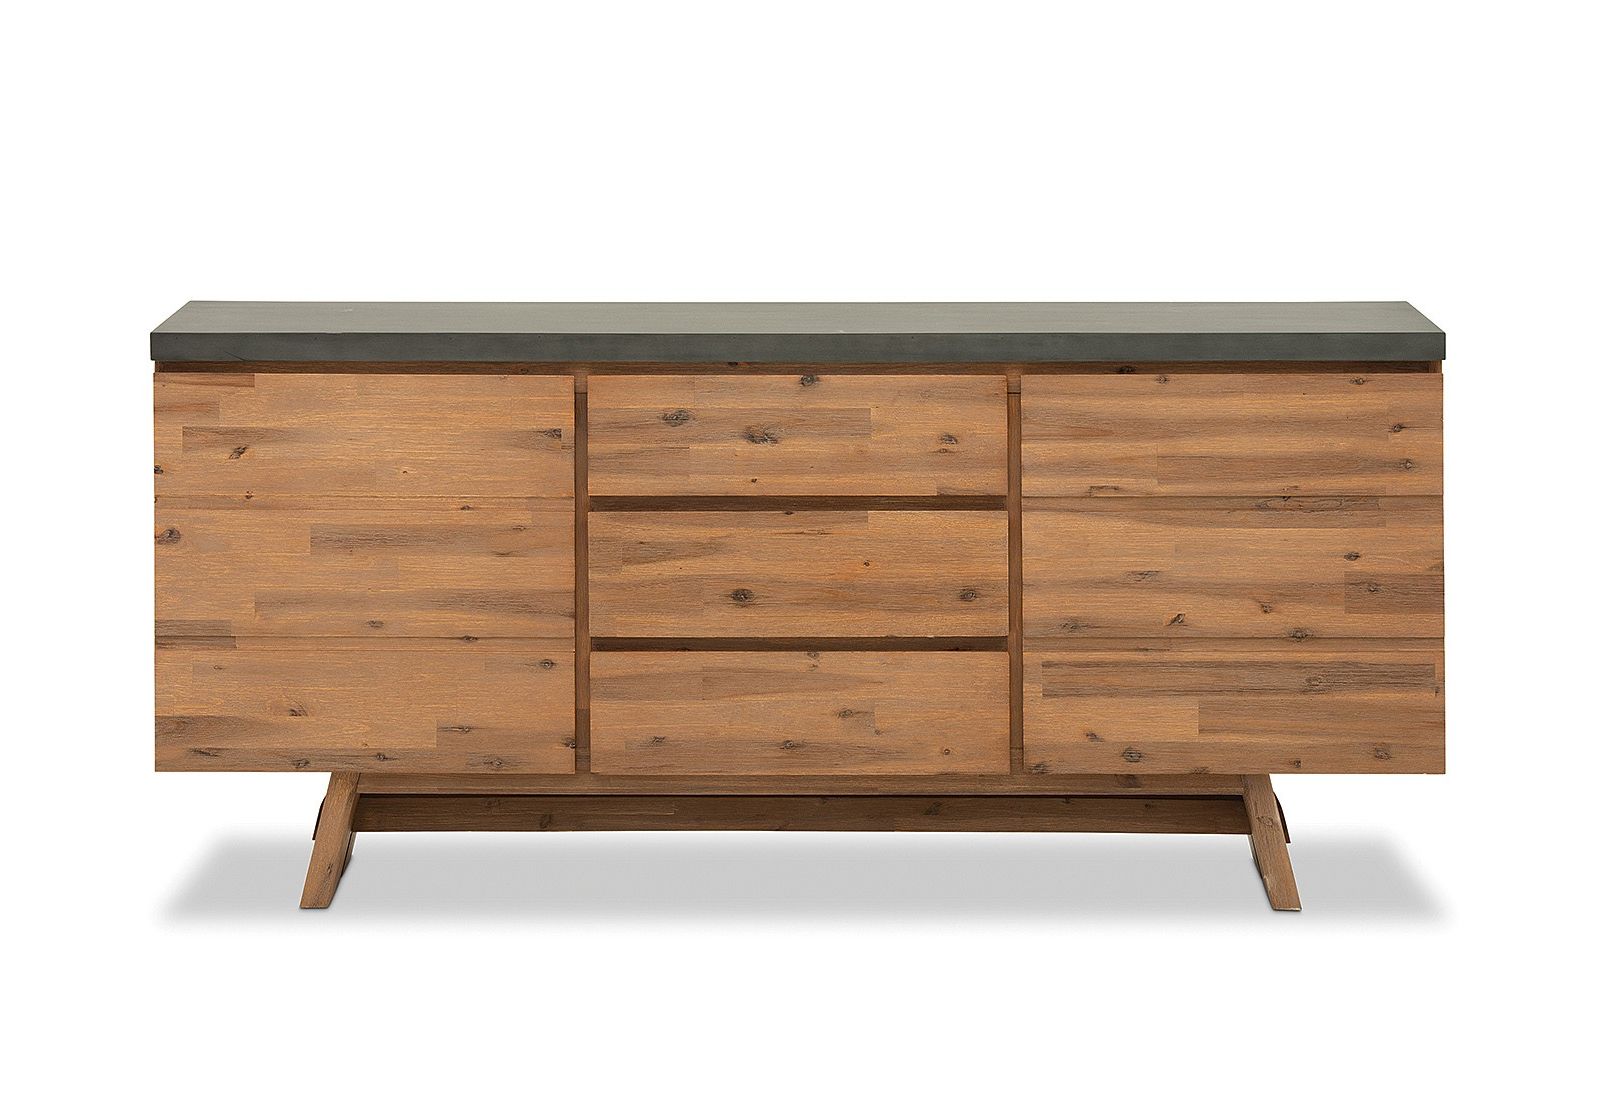 Buffet Tables & Sideboards | Amart Furniture Within Rutherford Sideboards (View 6 of 20)